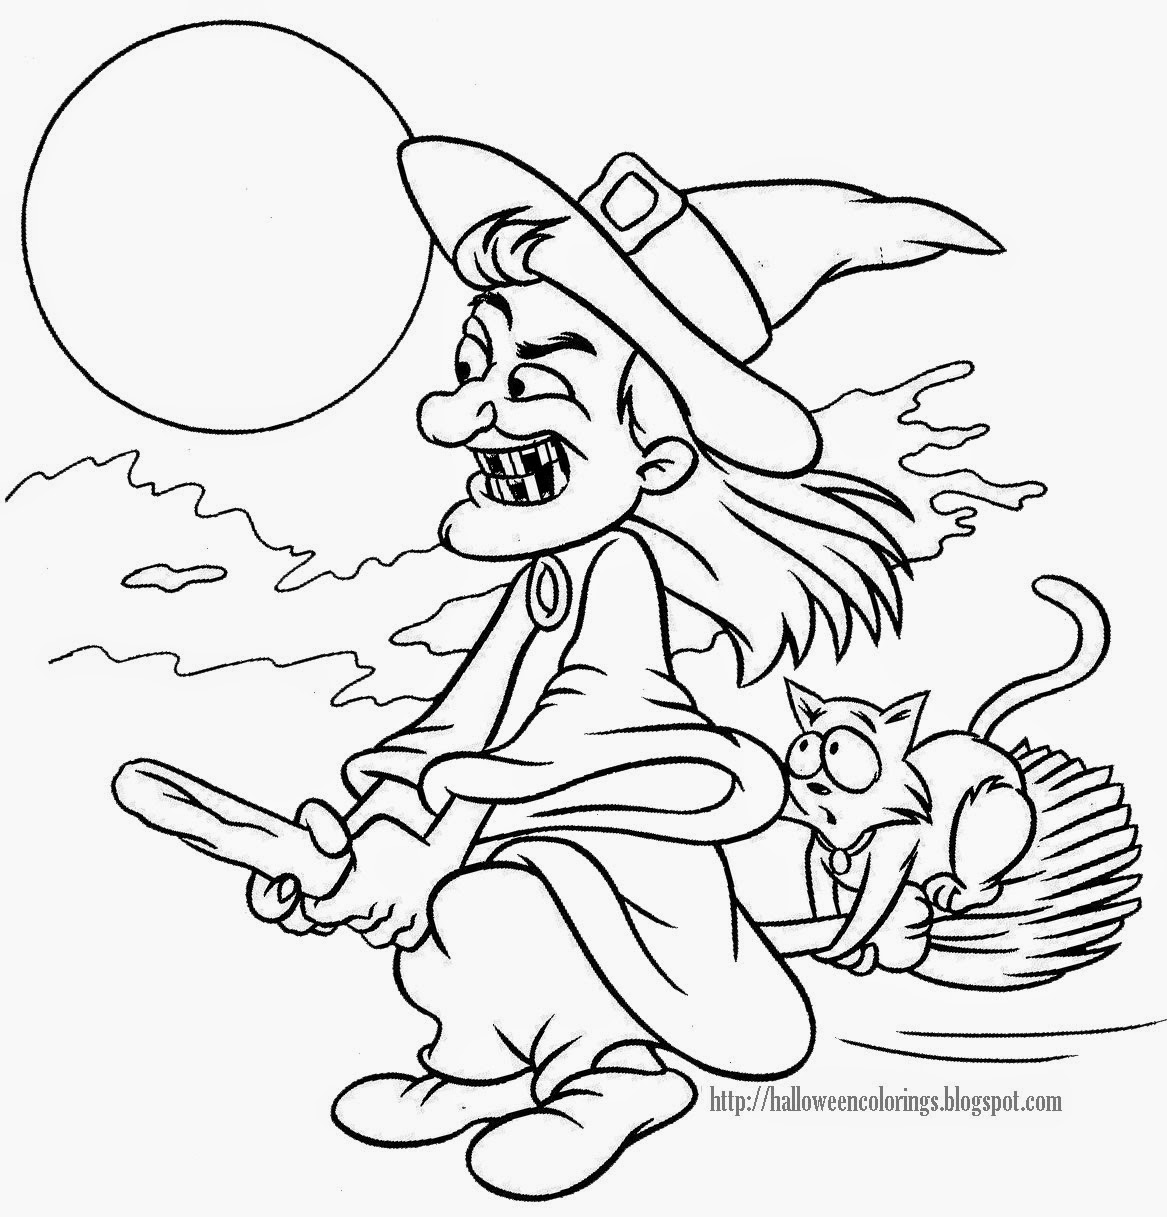 COLORING+PAGES+OF+WITCHES+(2).jpg (1167×1217)